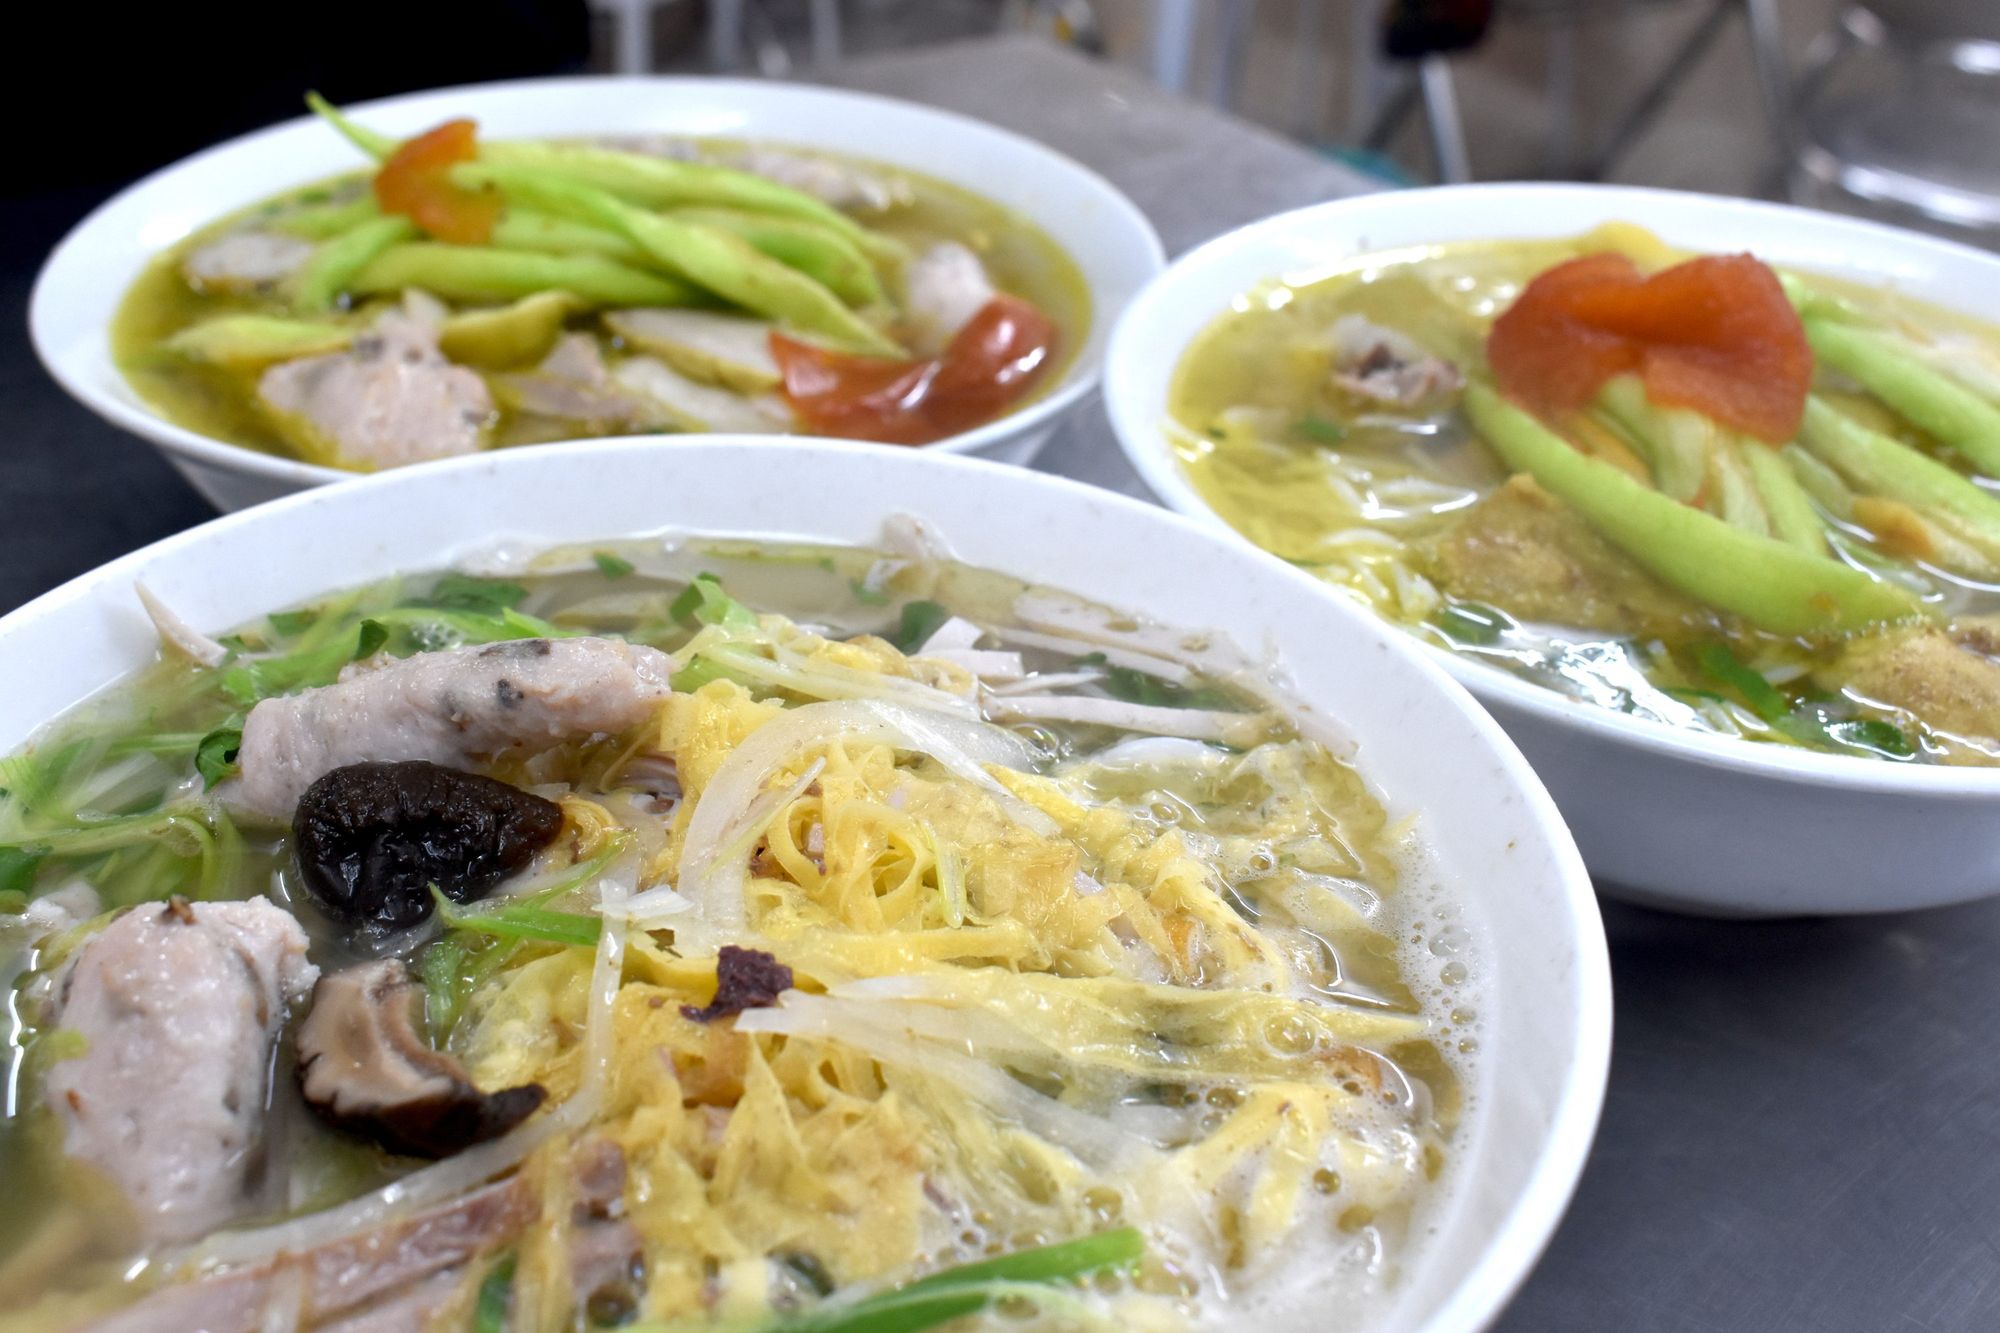 10 delicious dishes for breakfast in Hanoi - Where to eat during your trip